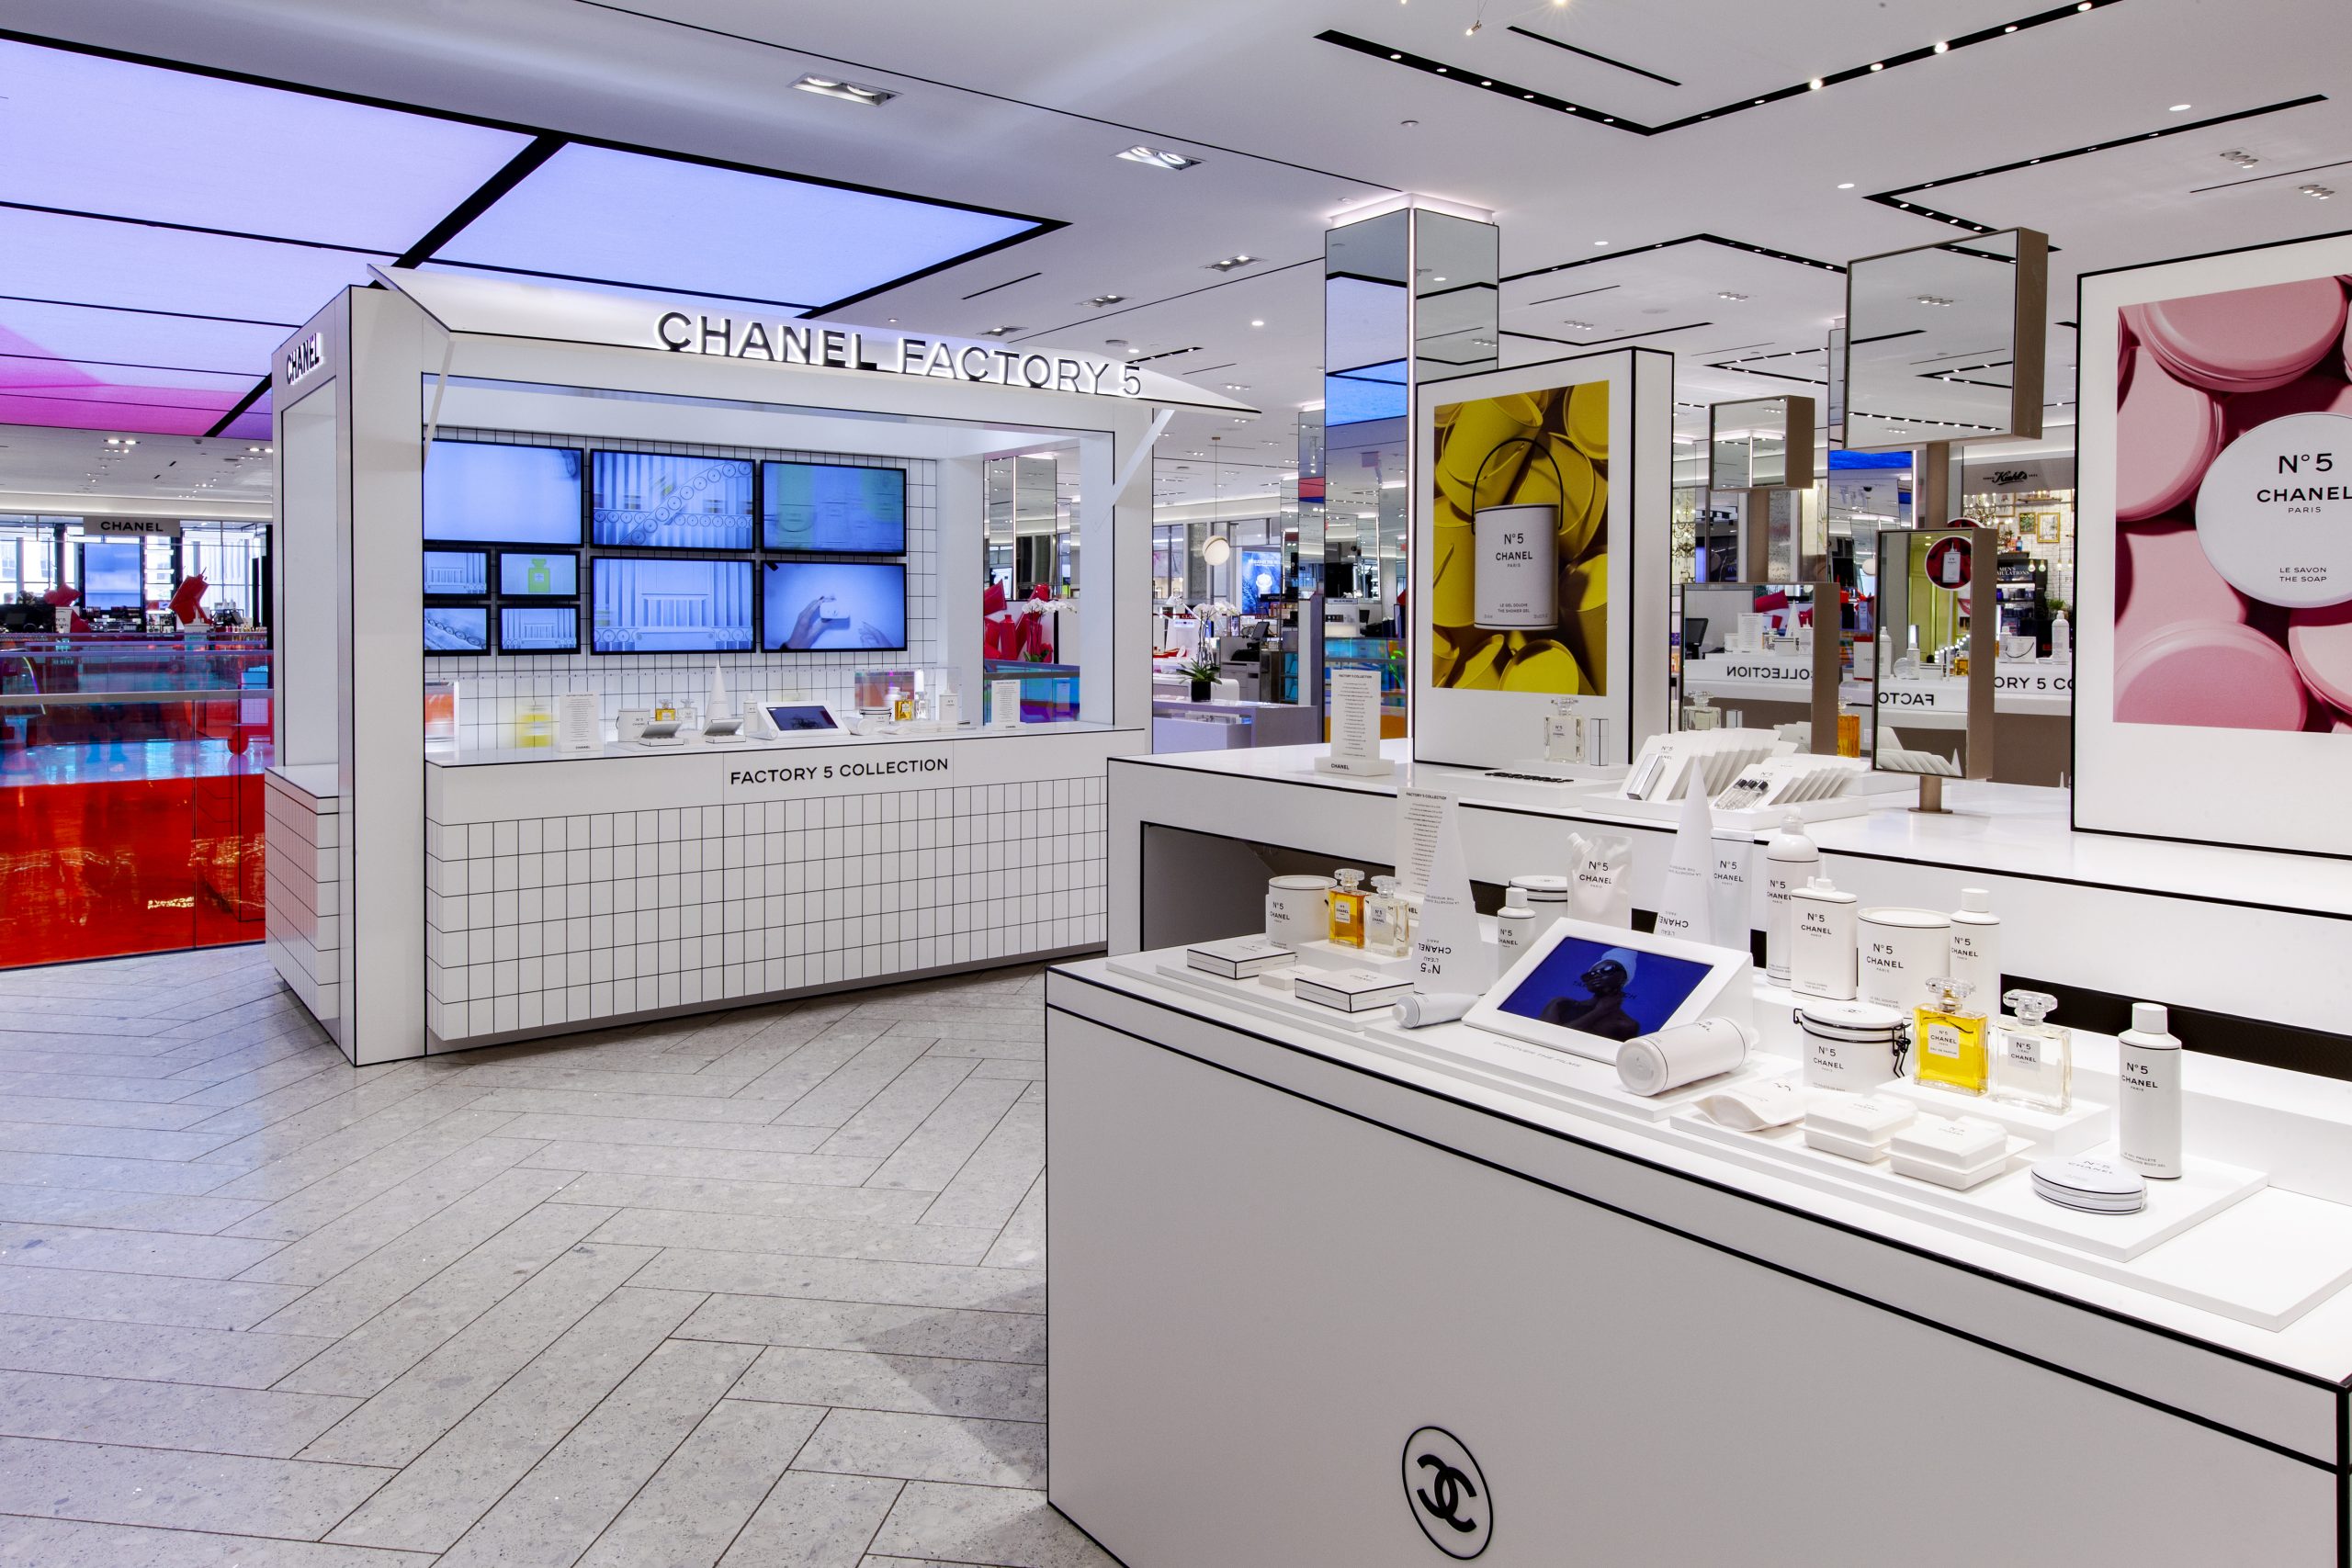 Chanel inks exclusive U.S. deal with Saks for Factory 5 launch